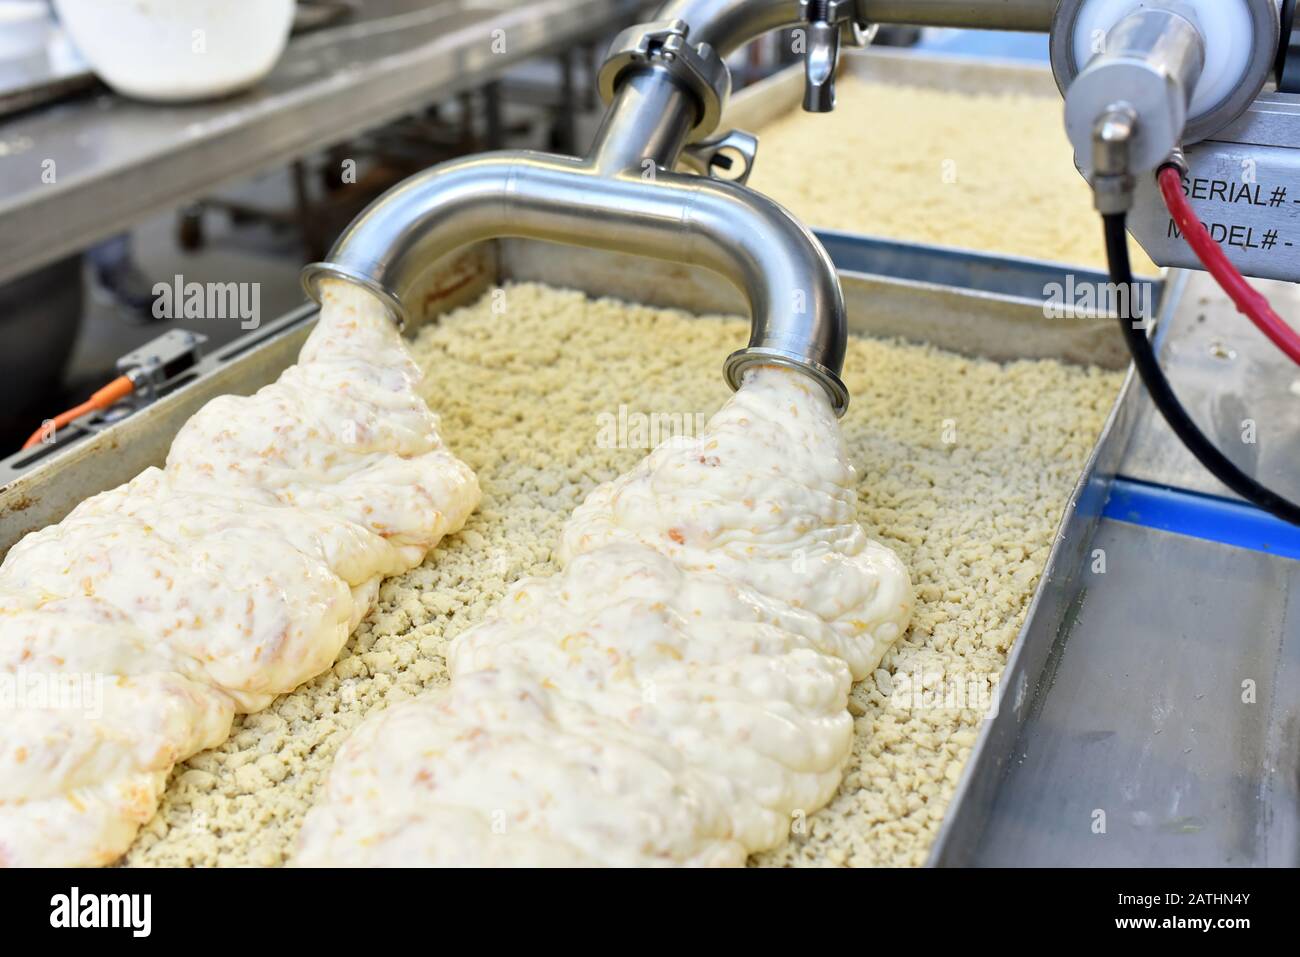 industrial production of cakes and tarts in a large bakery on an assembly line Stock Photo